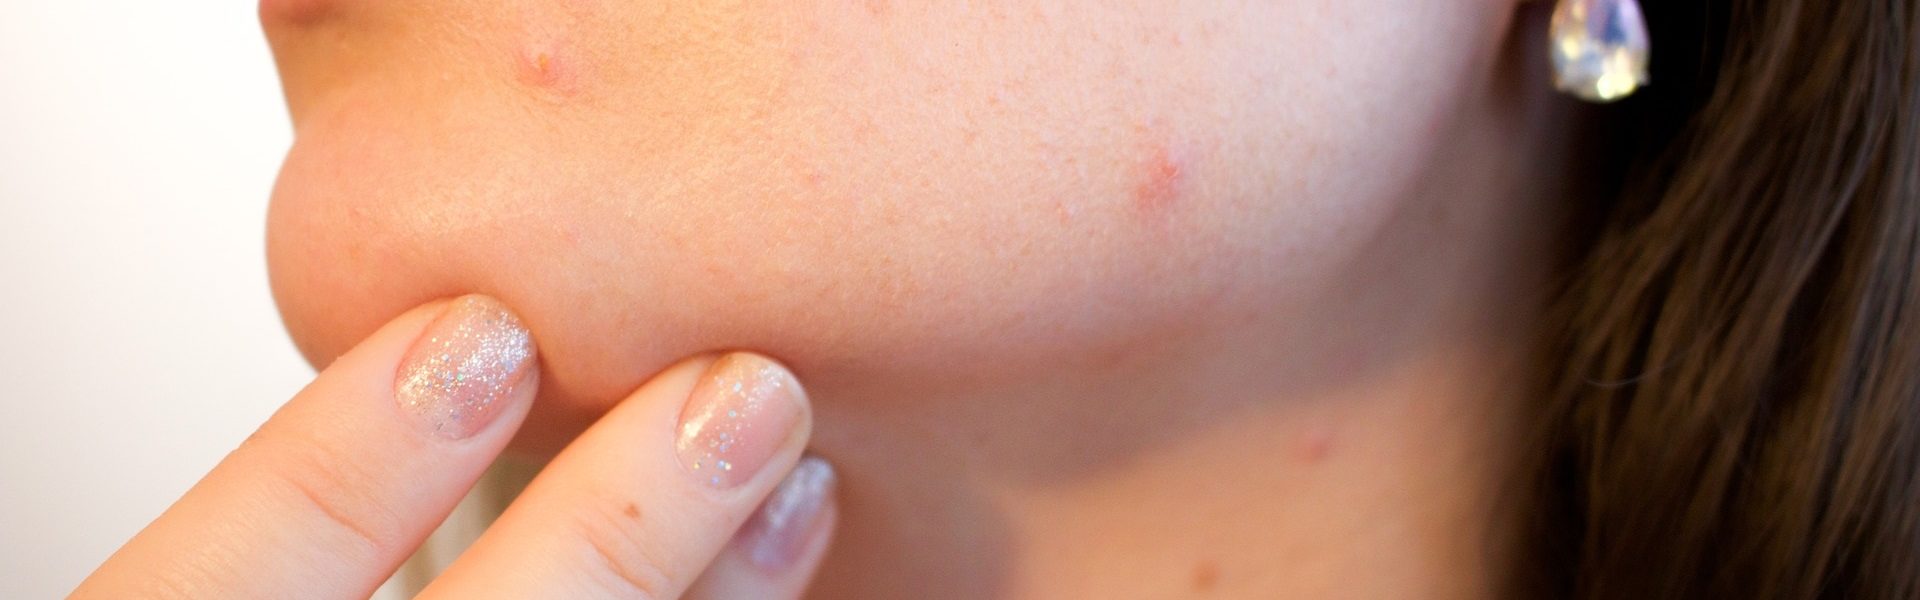 Are Chemical Peels Good for Acne? banner